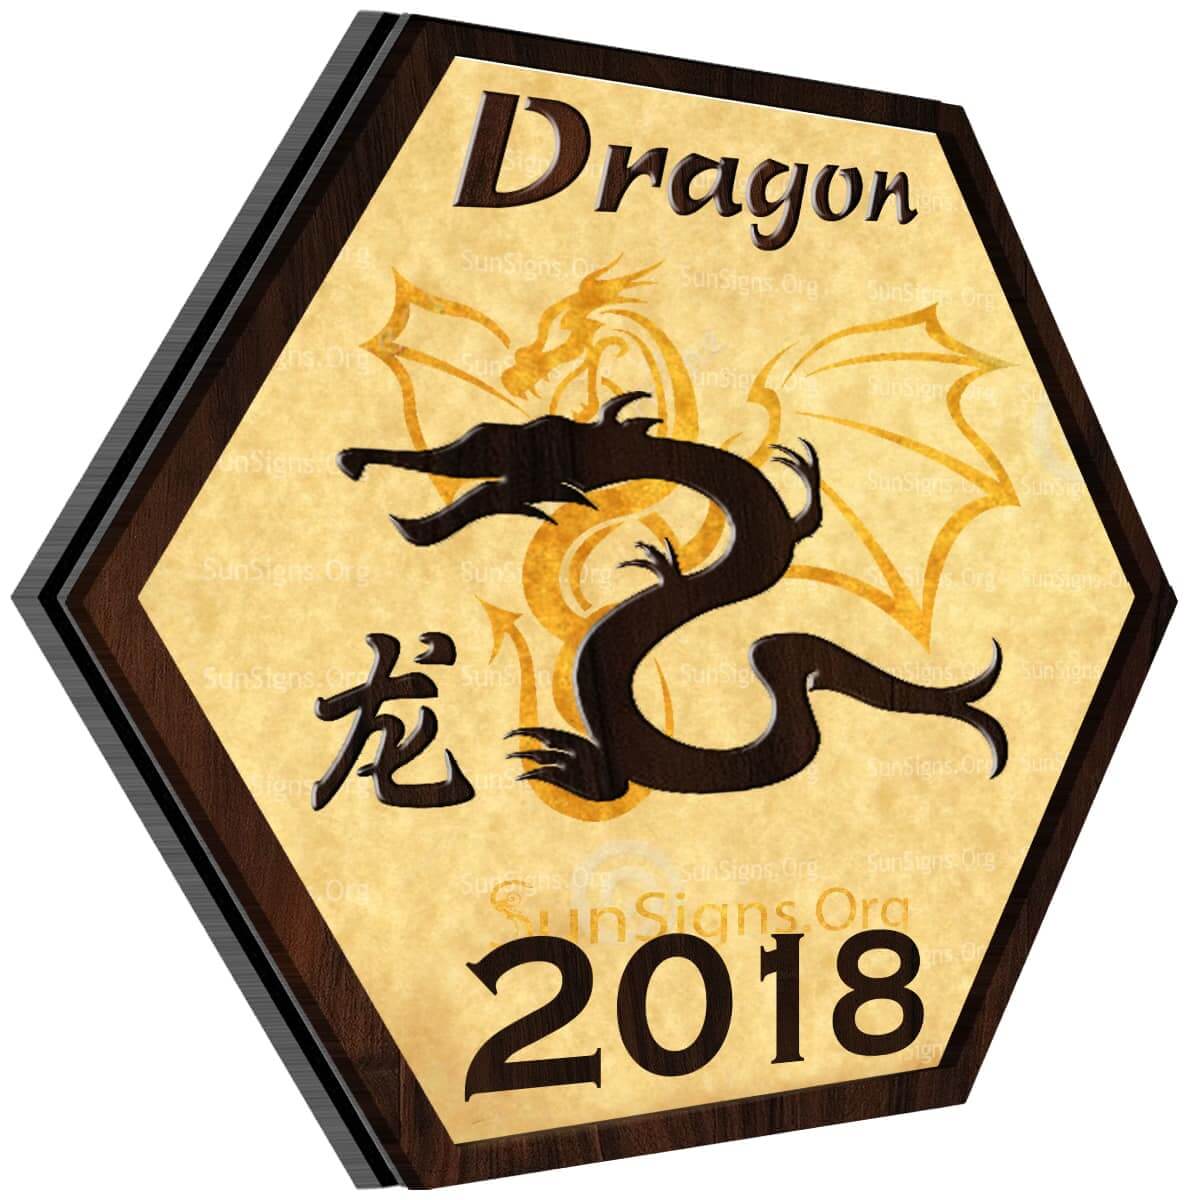 Dragon Horoscope 2018 Predictions For Love, Finance, Career, Health And Family